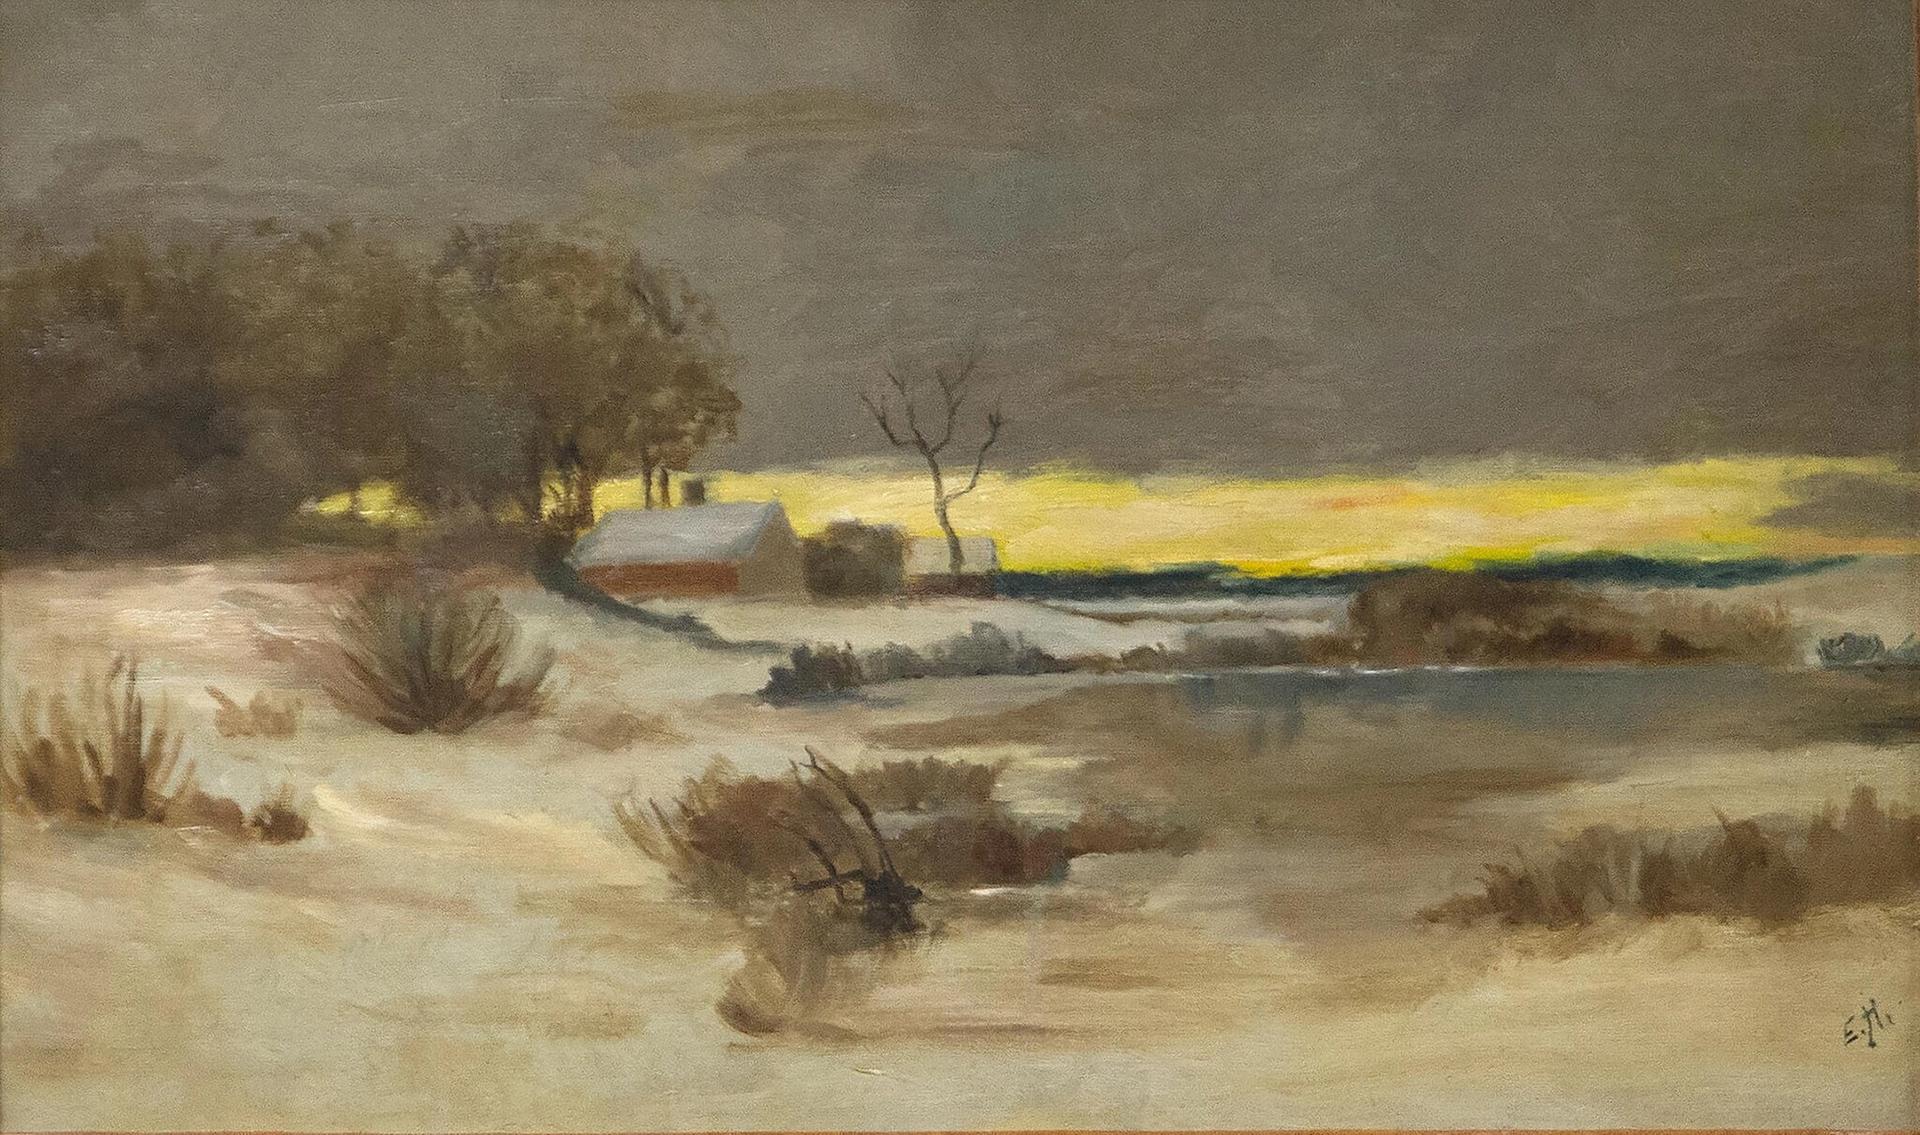 Hopper's teenage oil painting, Old ice pond at Nyack (around 1897), was found to be a copy after the Tonalist artist Bruce Crane 